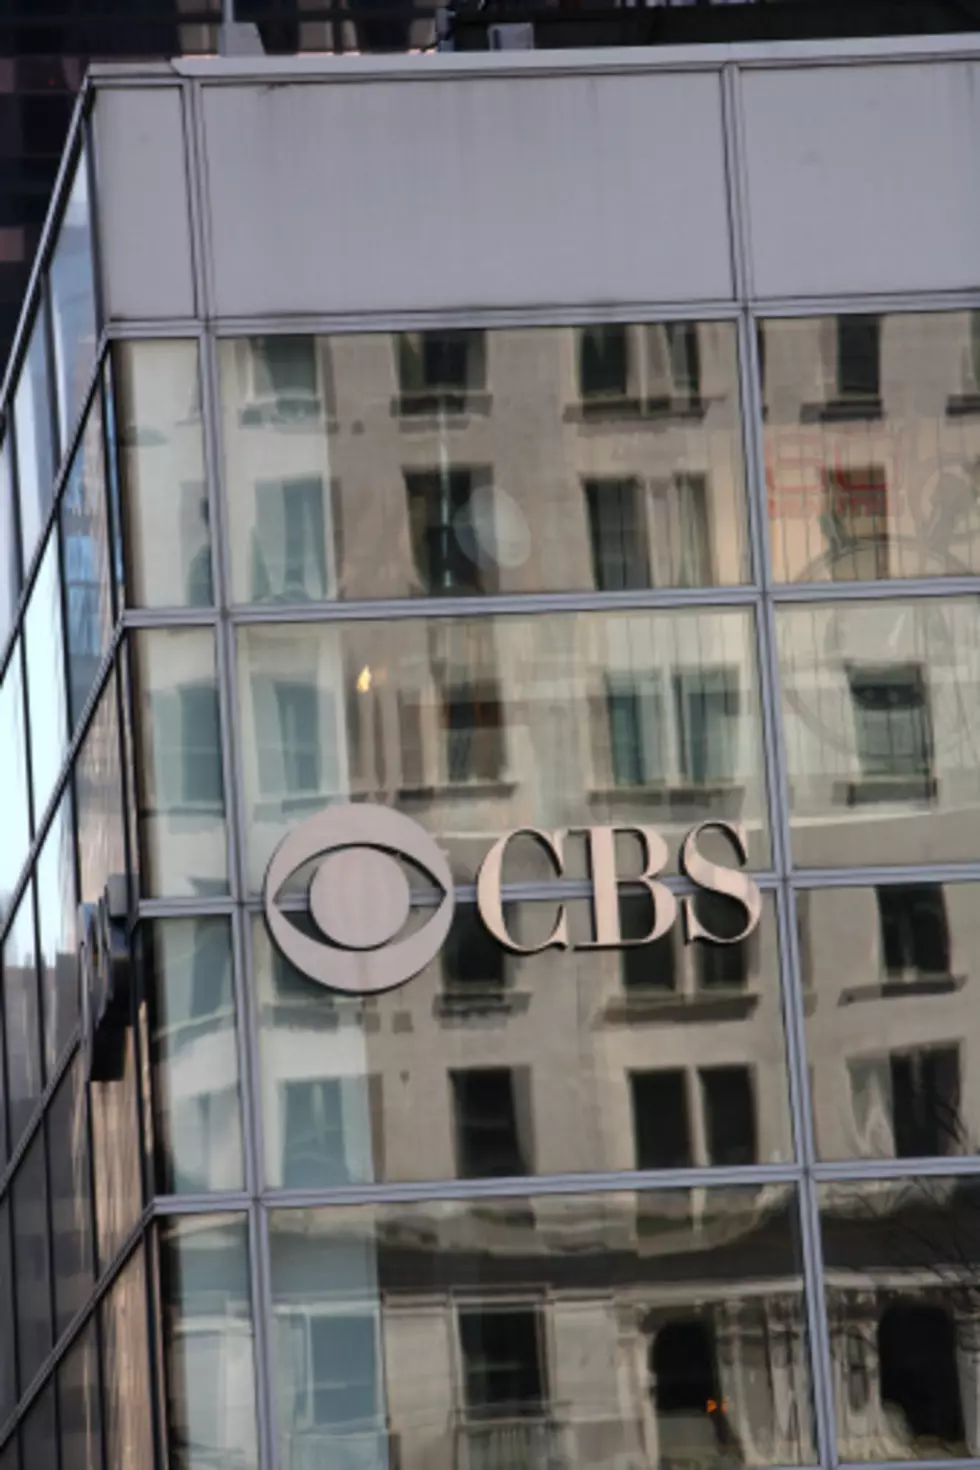 CBS Offers Separate Online Services